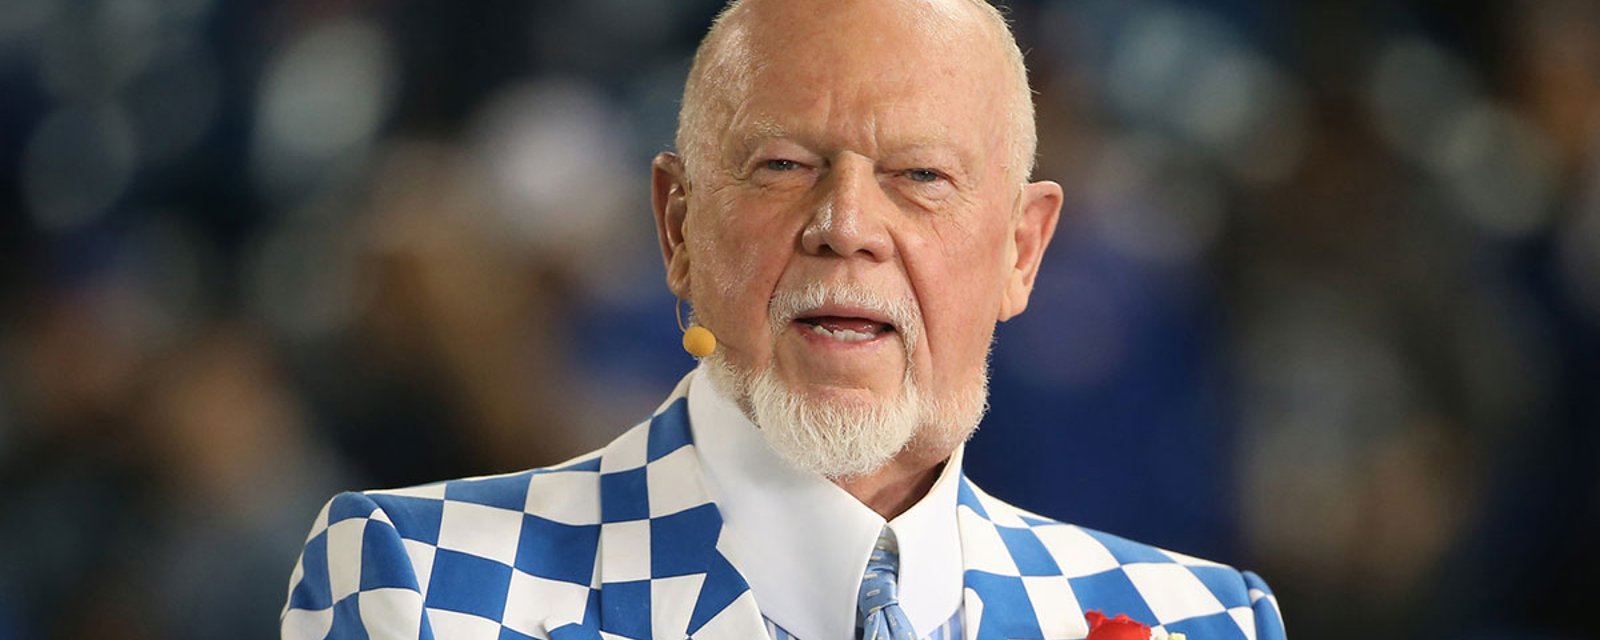 Don Cherry: “This guy is the jerk of jerks”